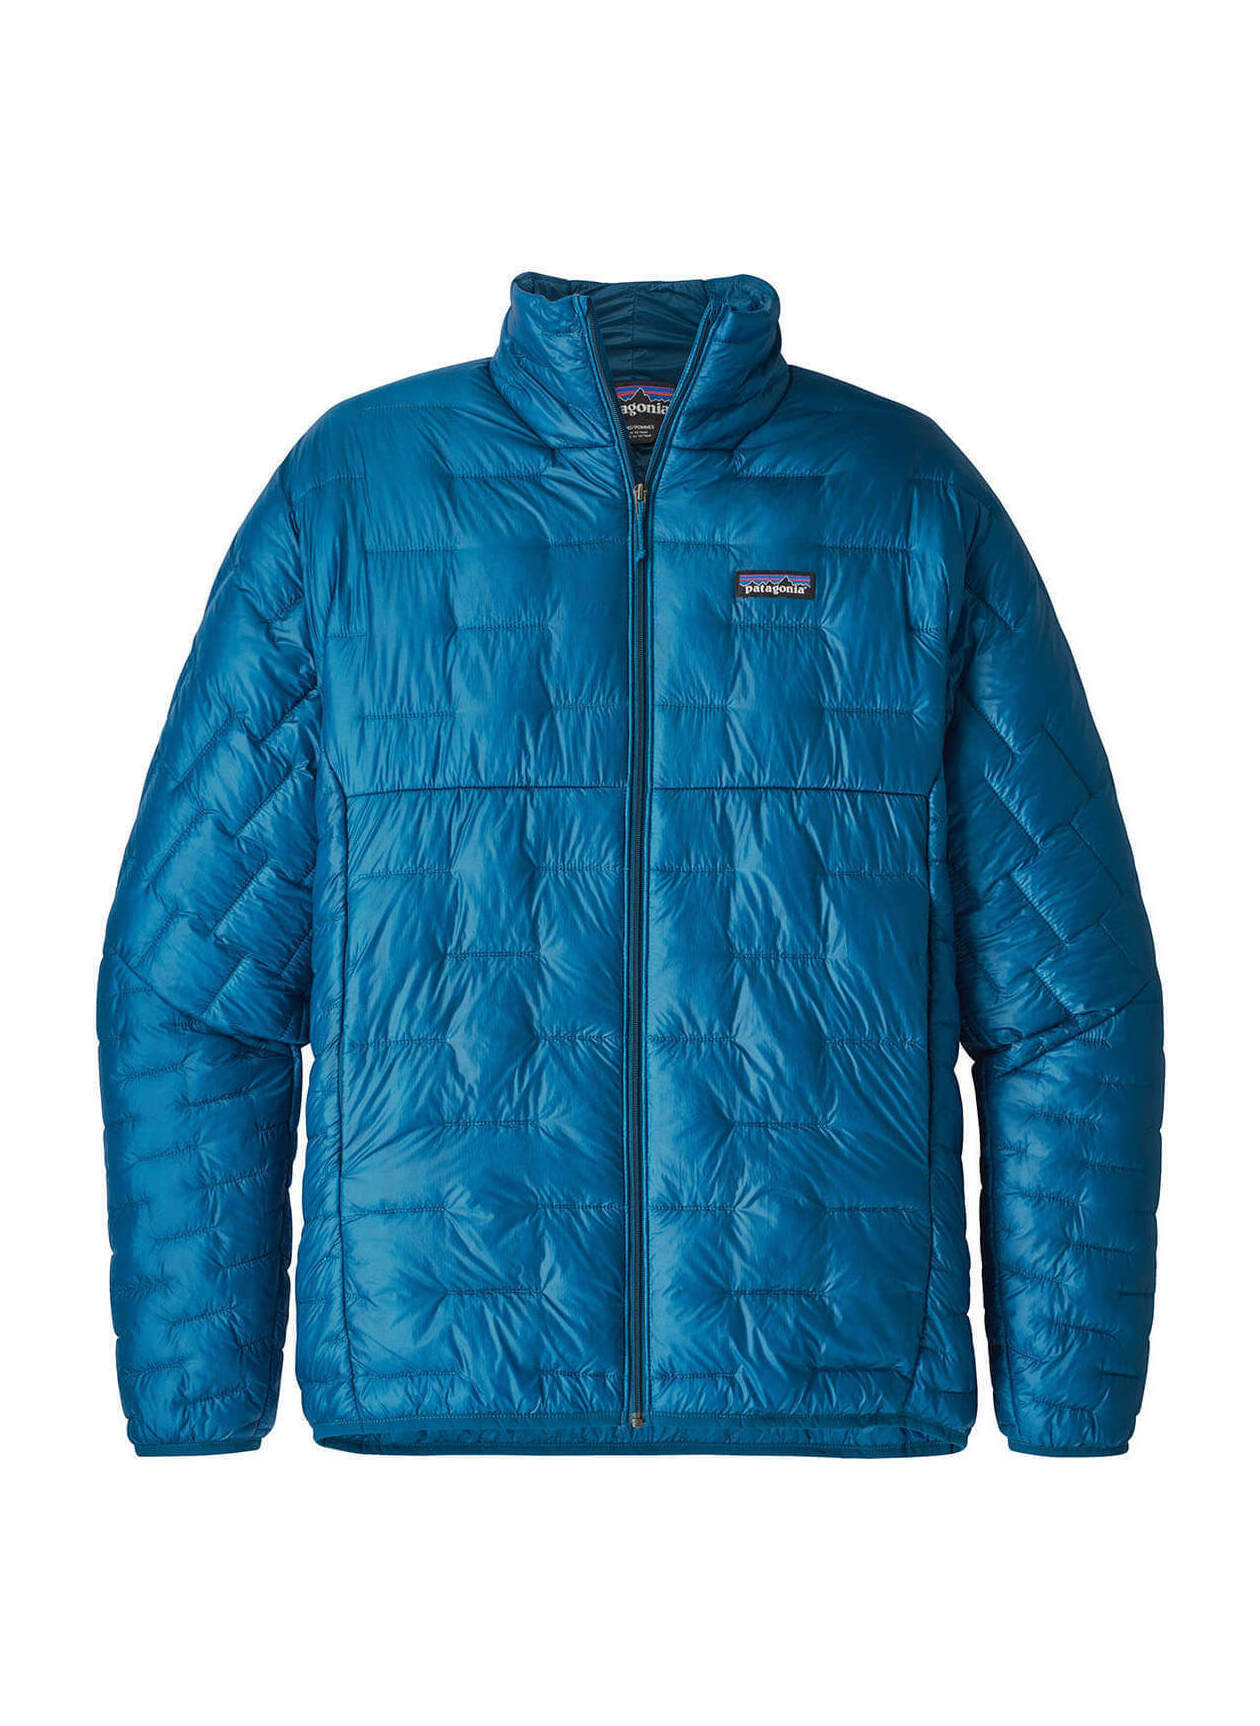 Patagonia Men's Micro Puff Jacket - ultralight windproof insulated